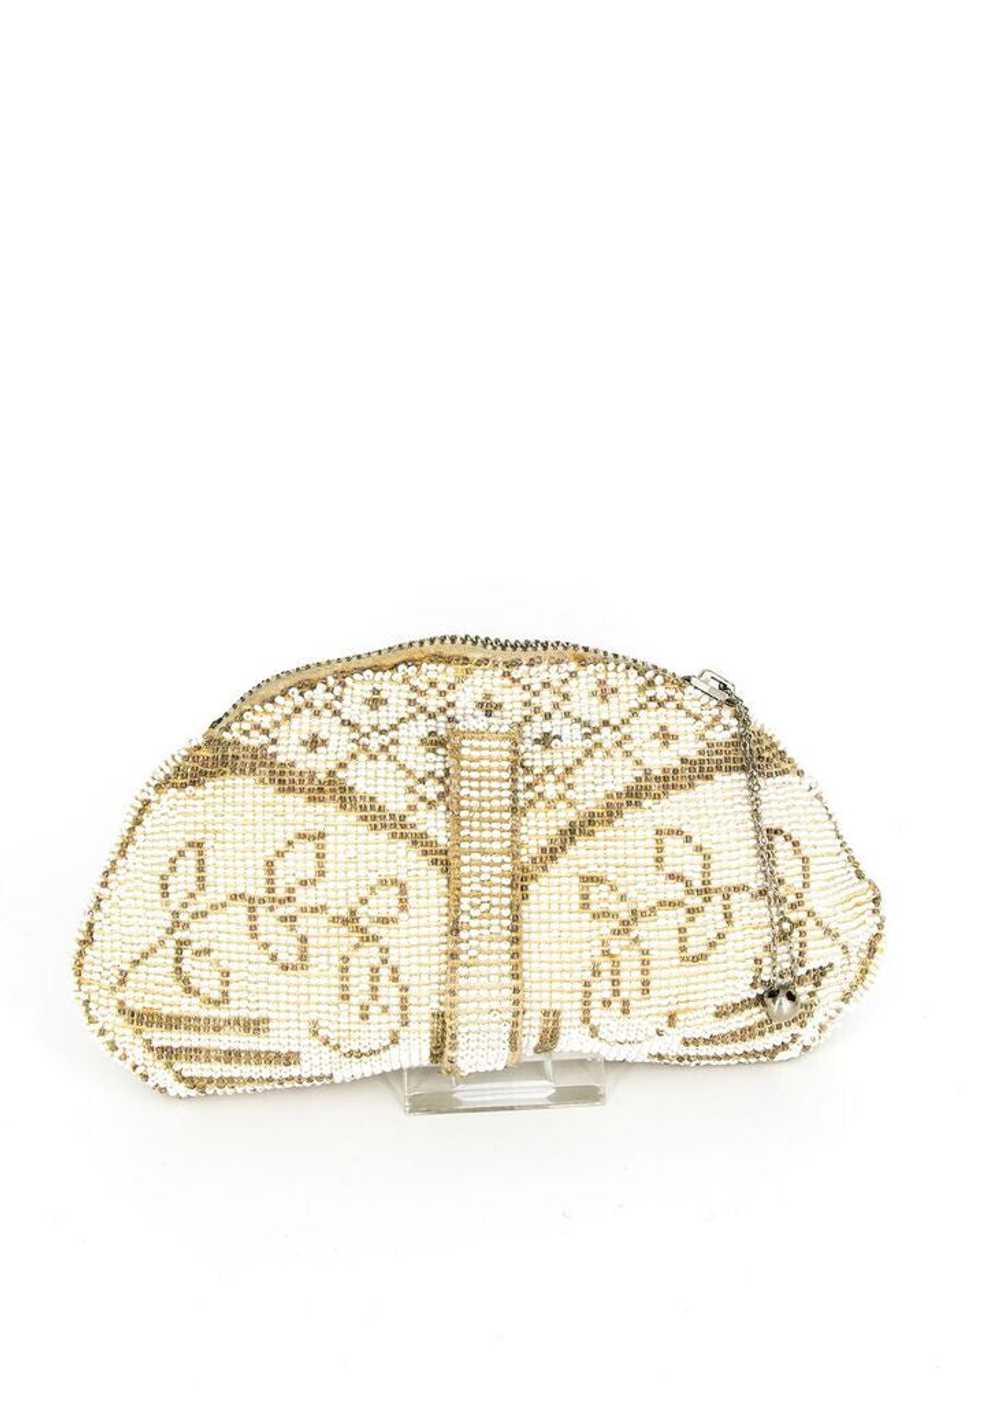 Oval Beaded Evening Bag 1930's - image 1